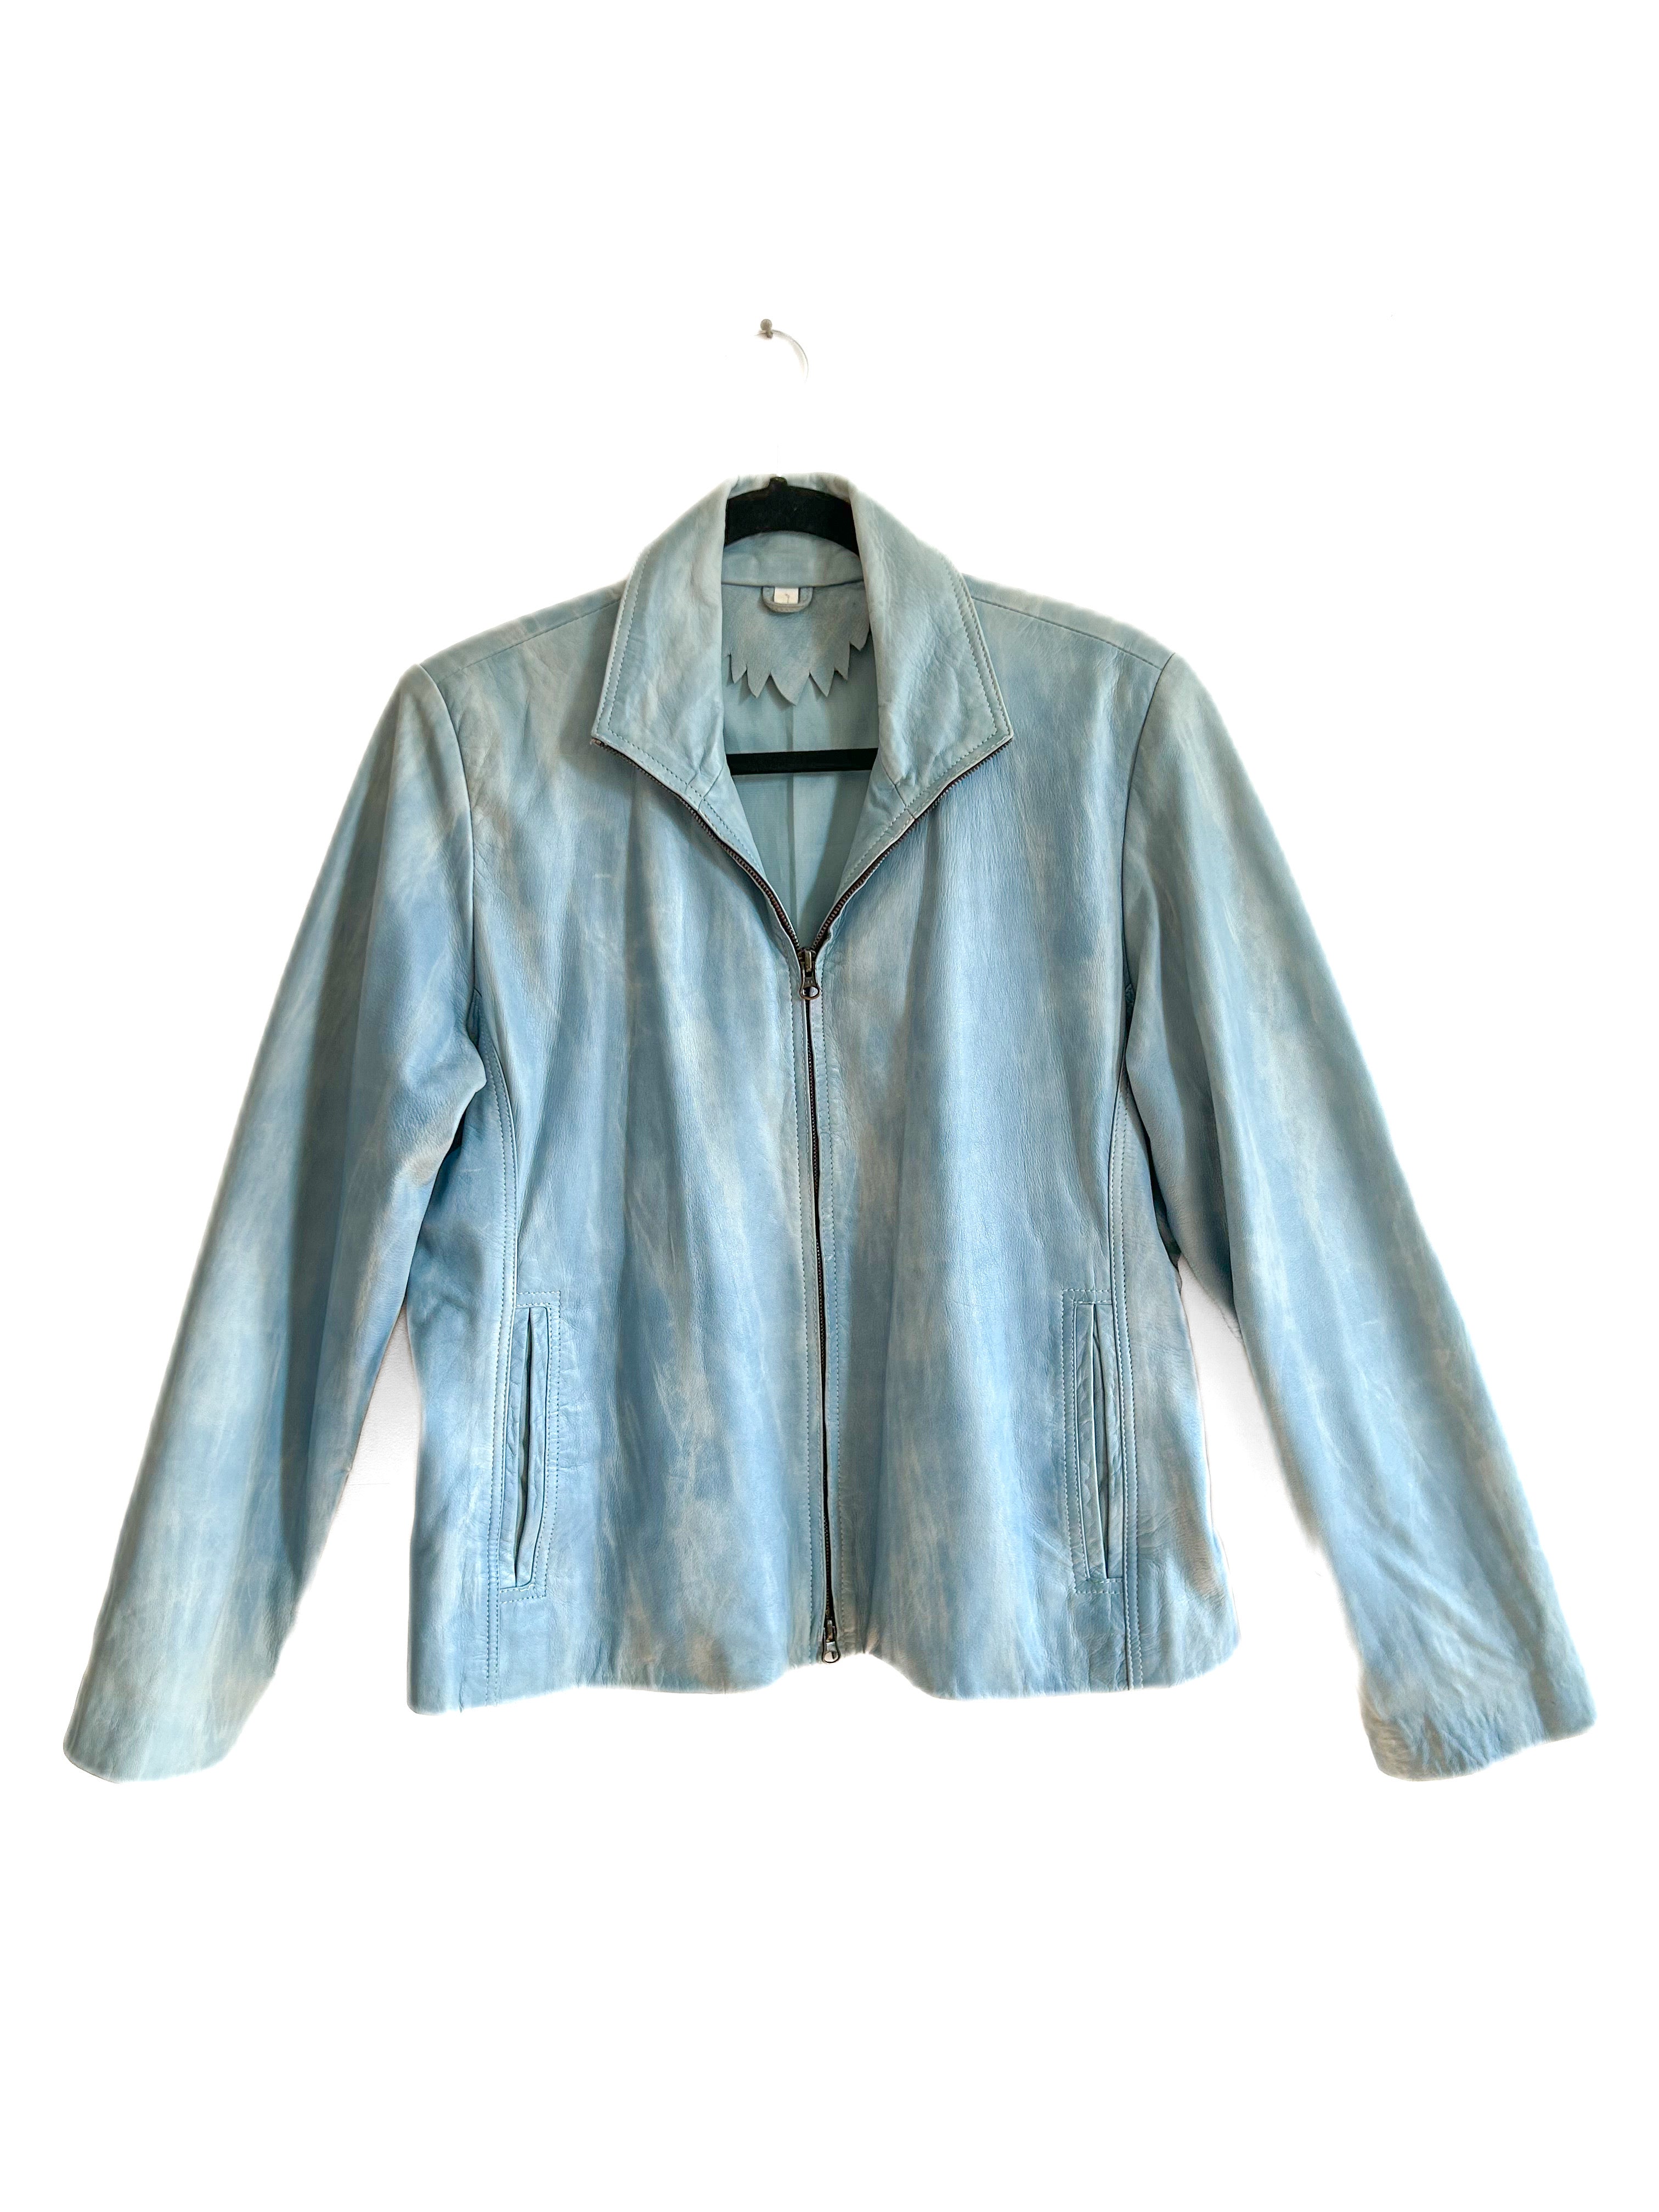 Sky Blue Butter Soft Kid Leather Jacket with Watercolour Marble Look